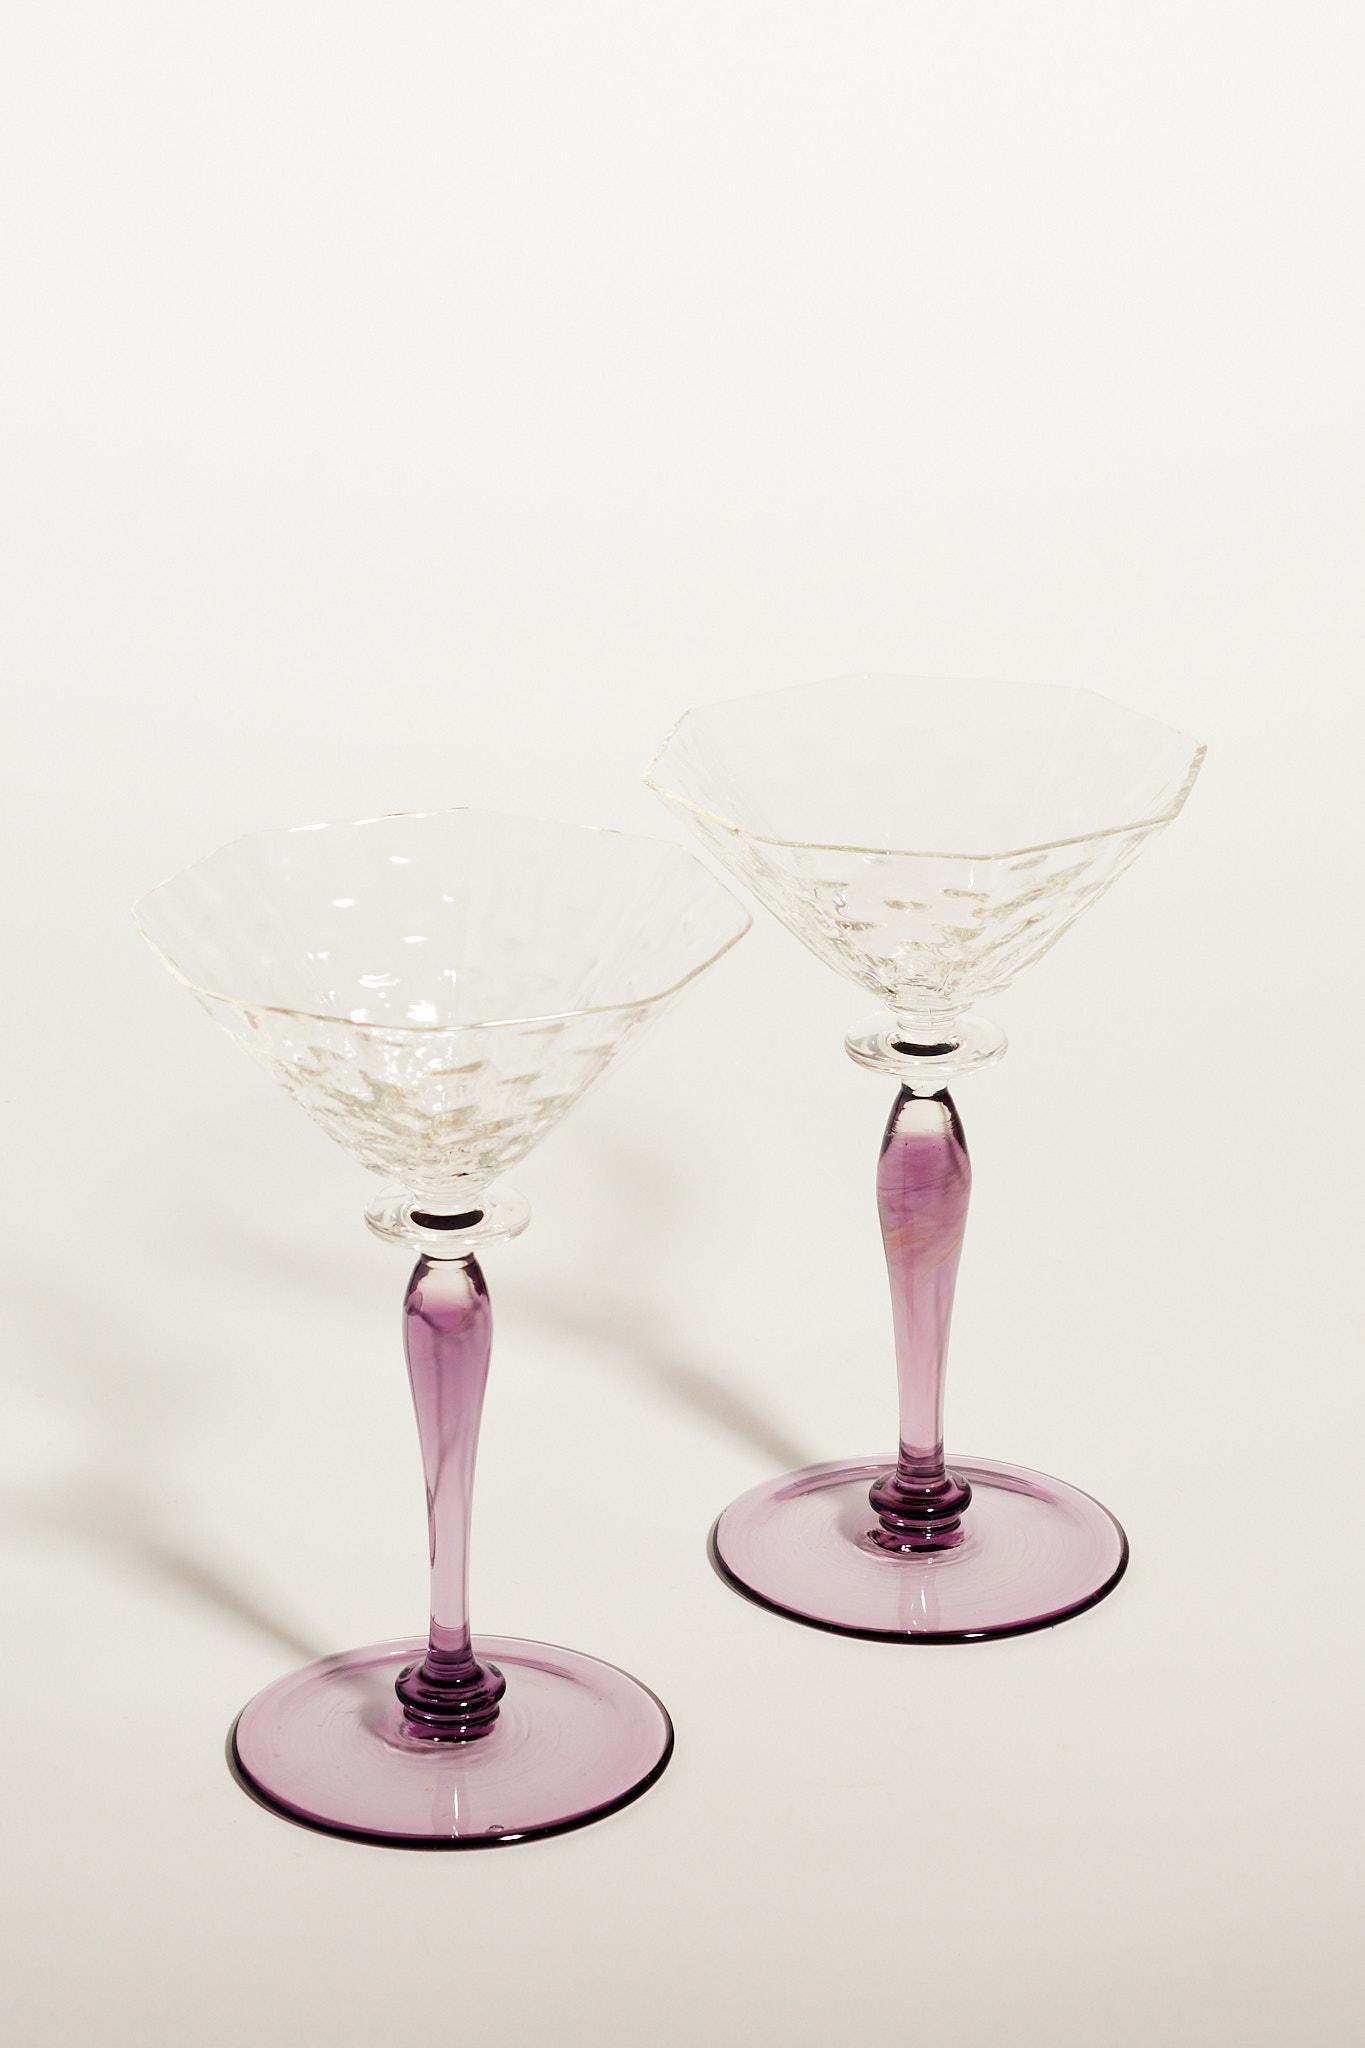 Elegant set of two wine glasses with rippled clear glass bowls and amethyst baluster style stems.

